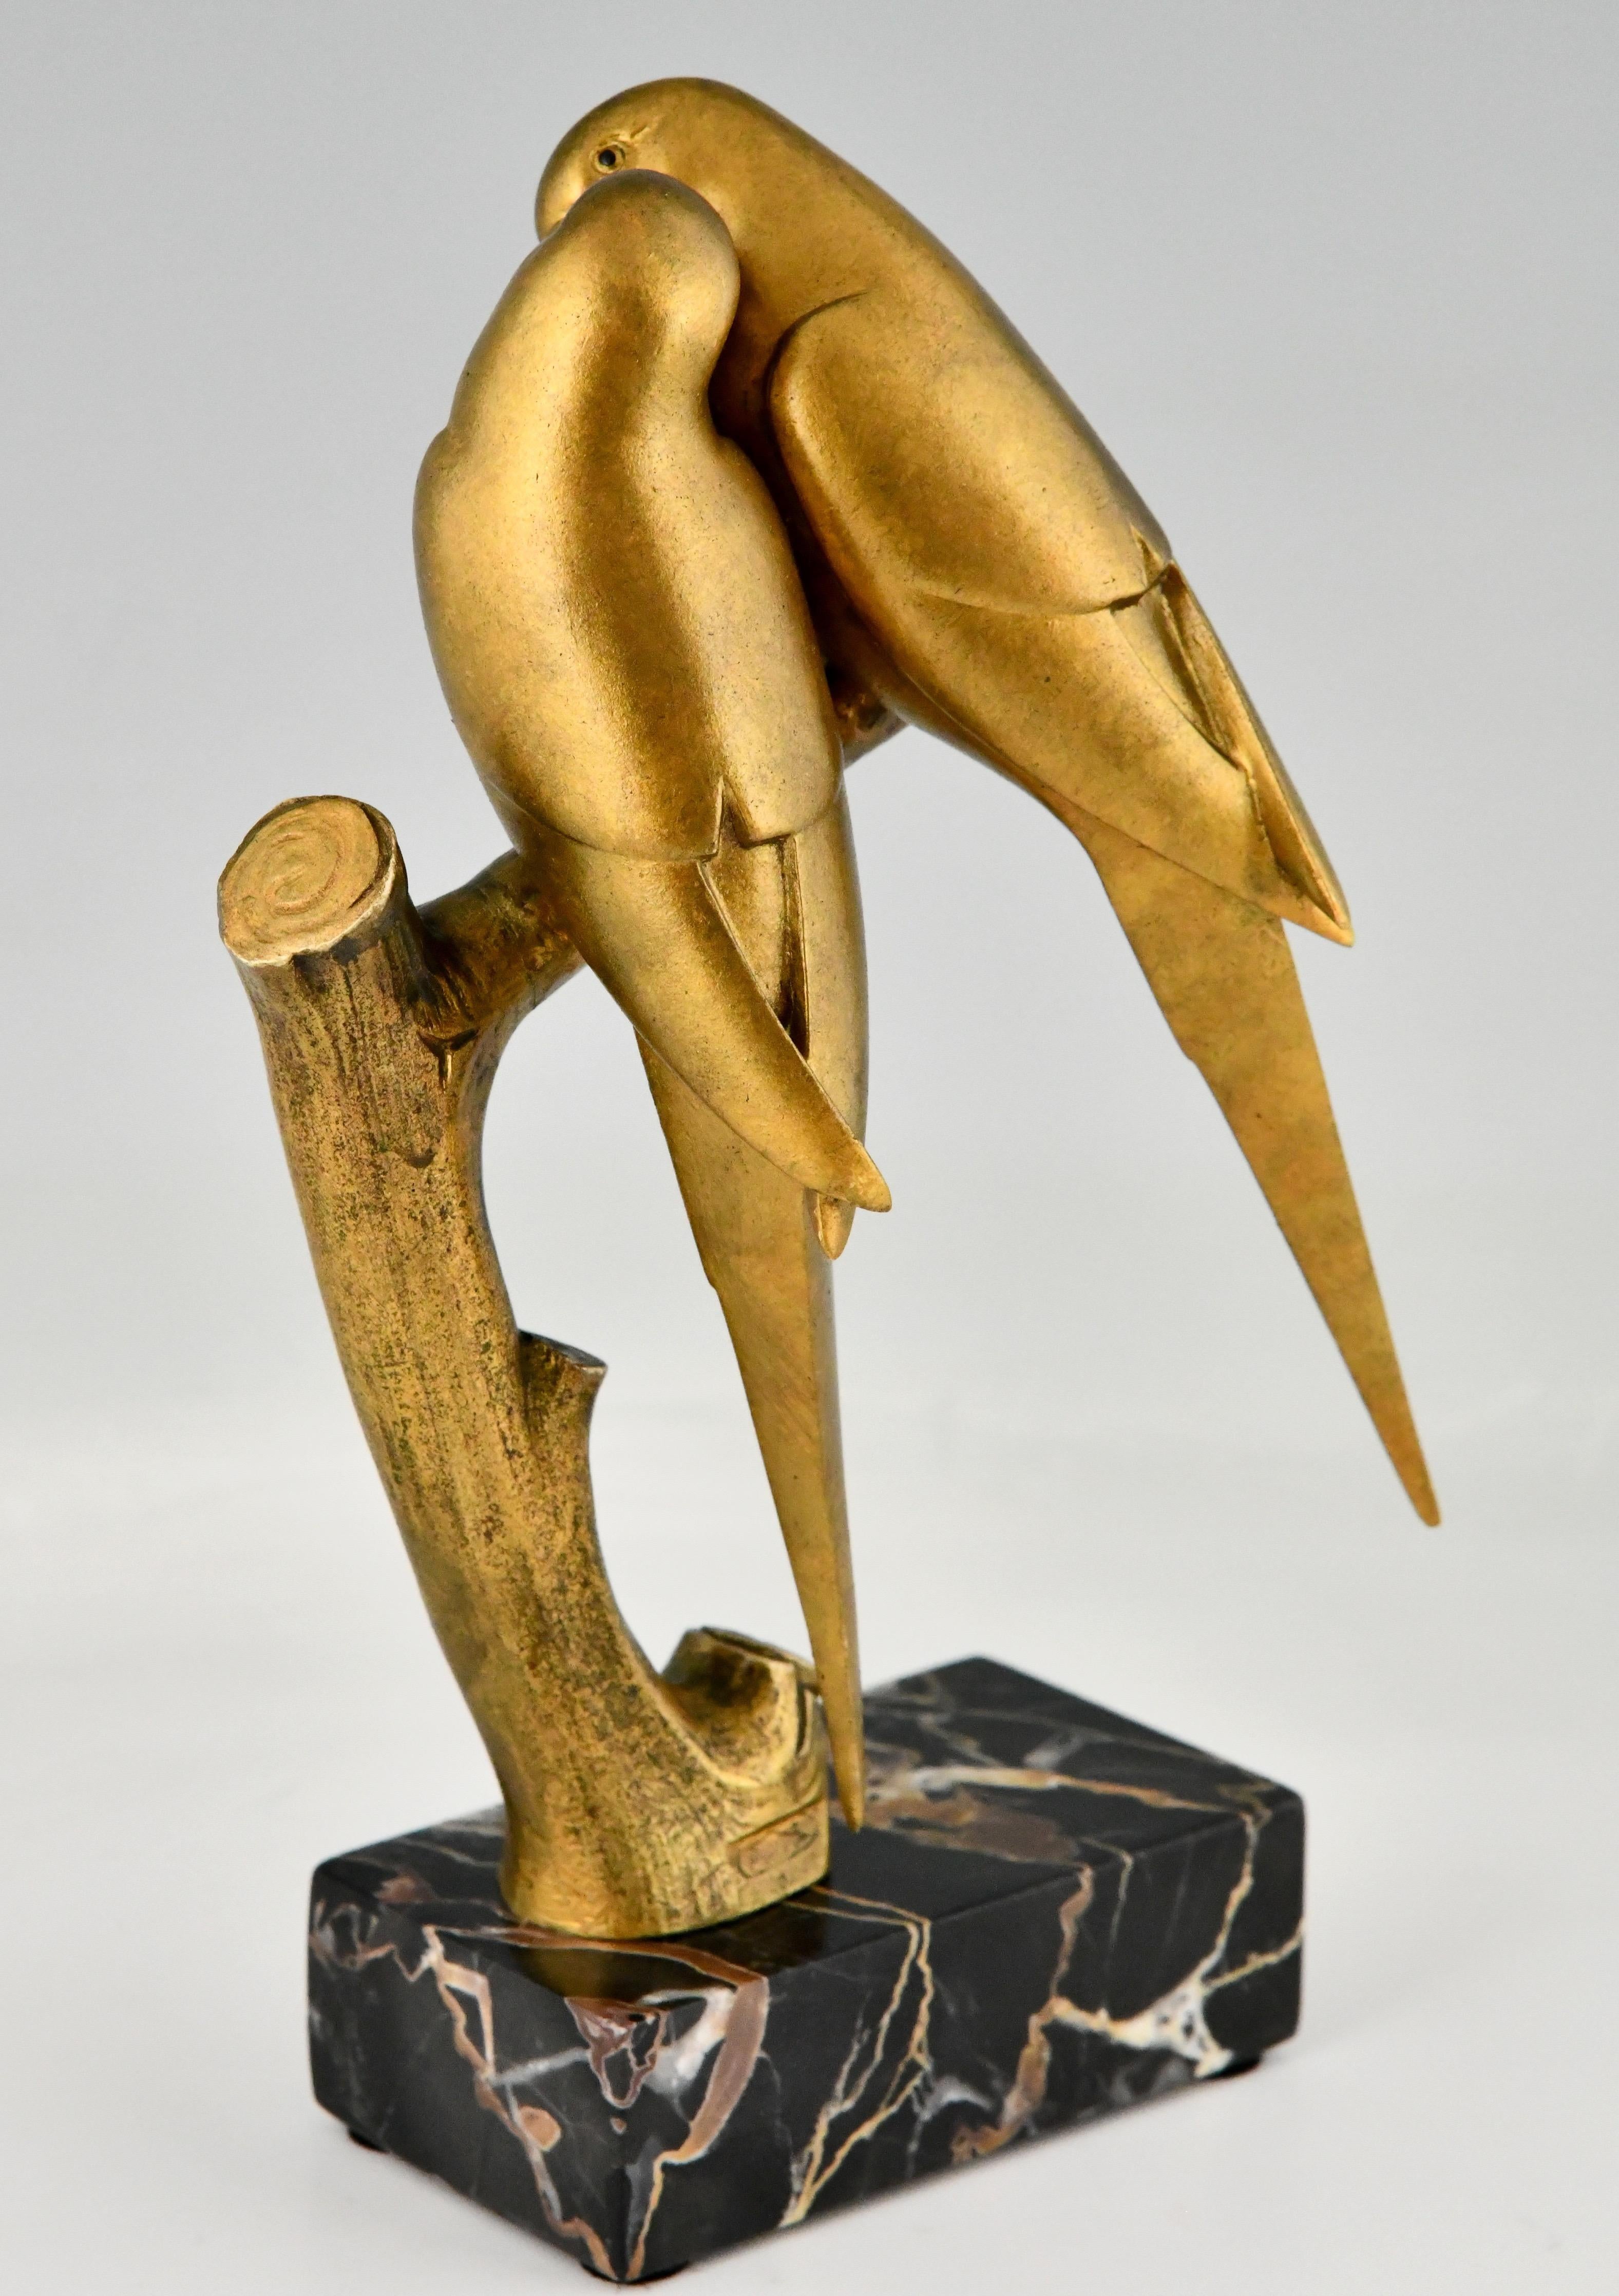 Early 20th Century French Art Deco Bronze Sculpture Lovebirds Parakeets by Paul Marec, France 1925